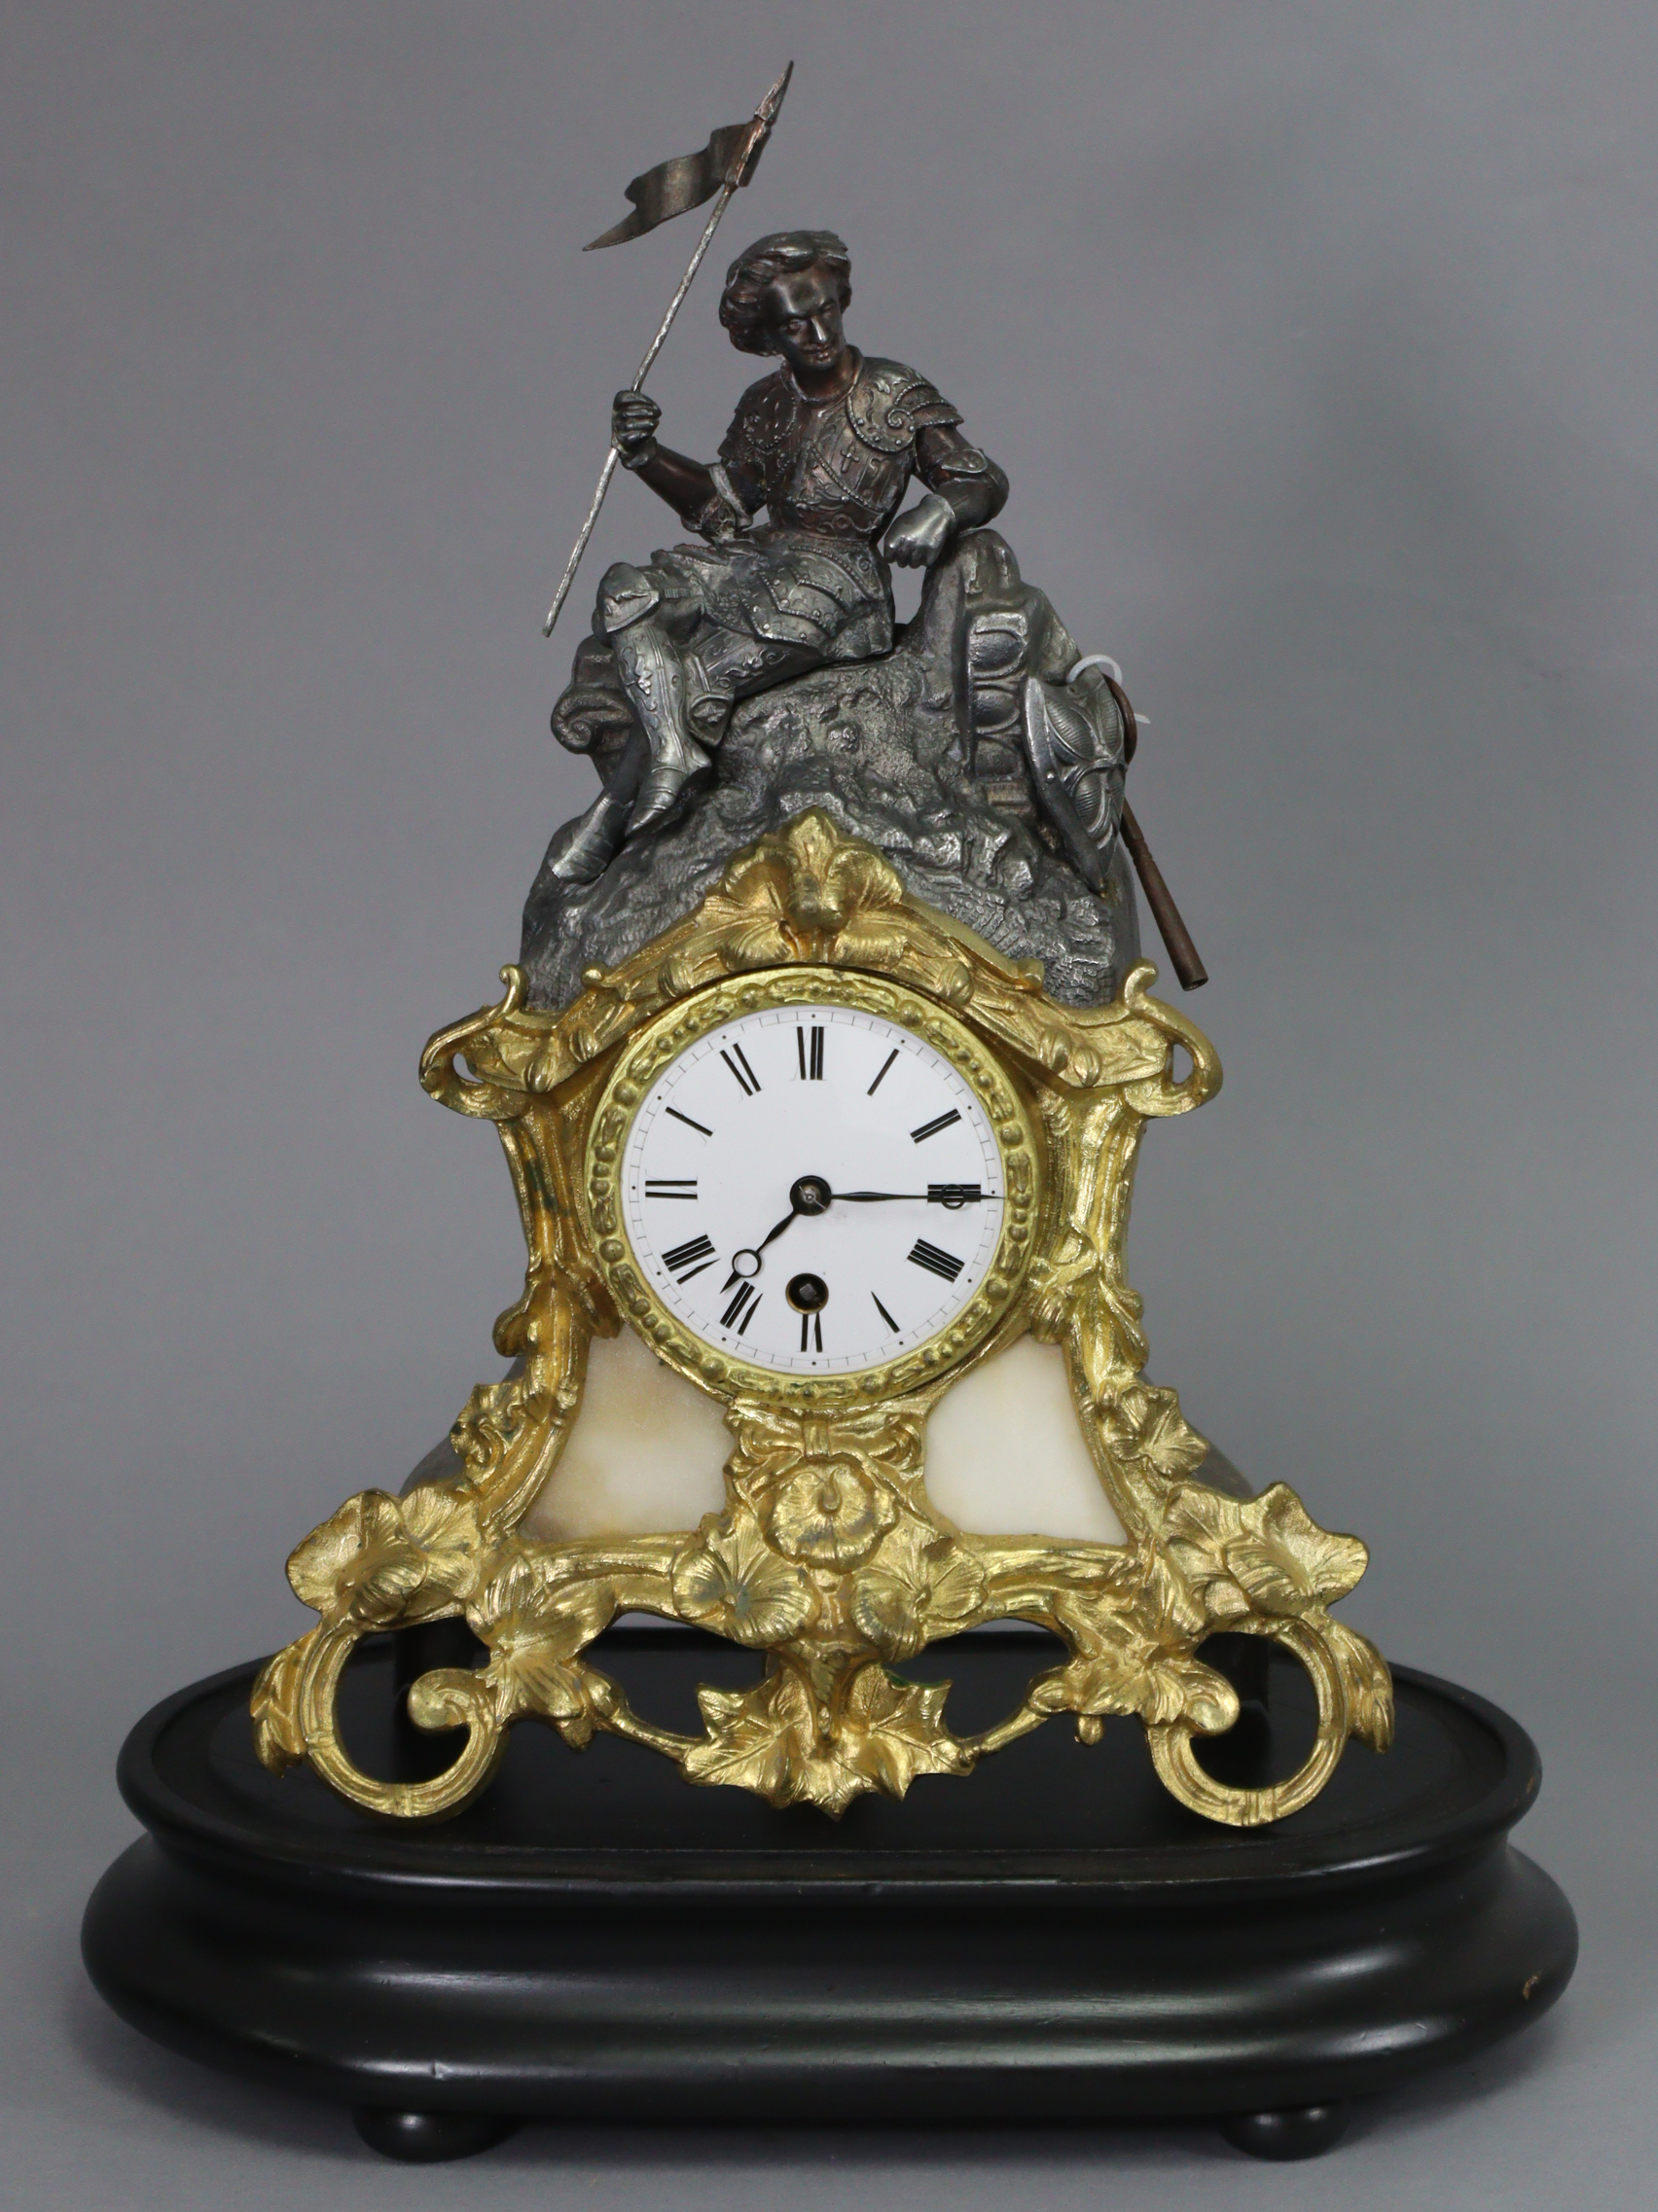 A 19th century French mantel clock in speltre figural case with pierced gilt-metal rococo style